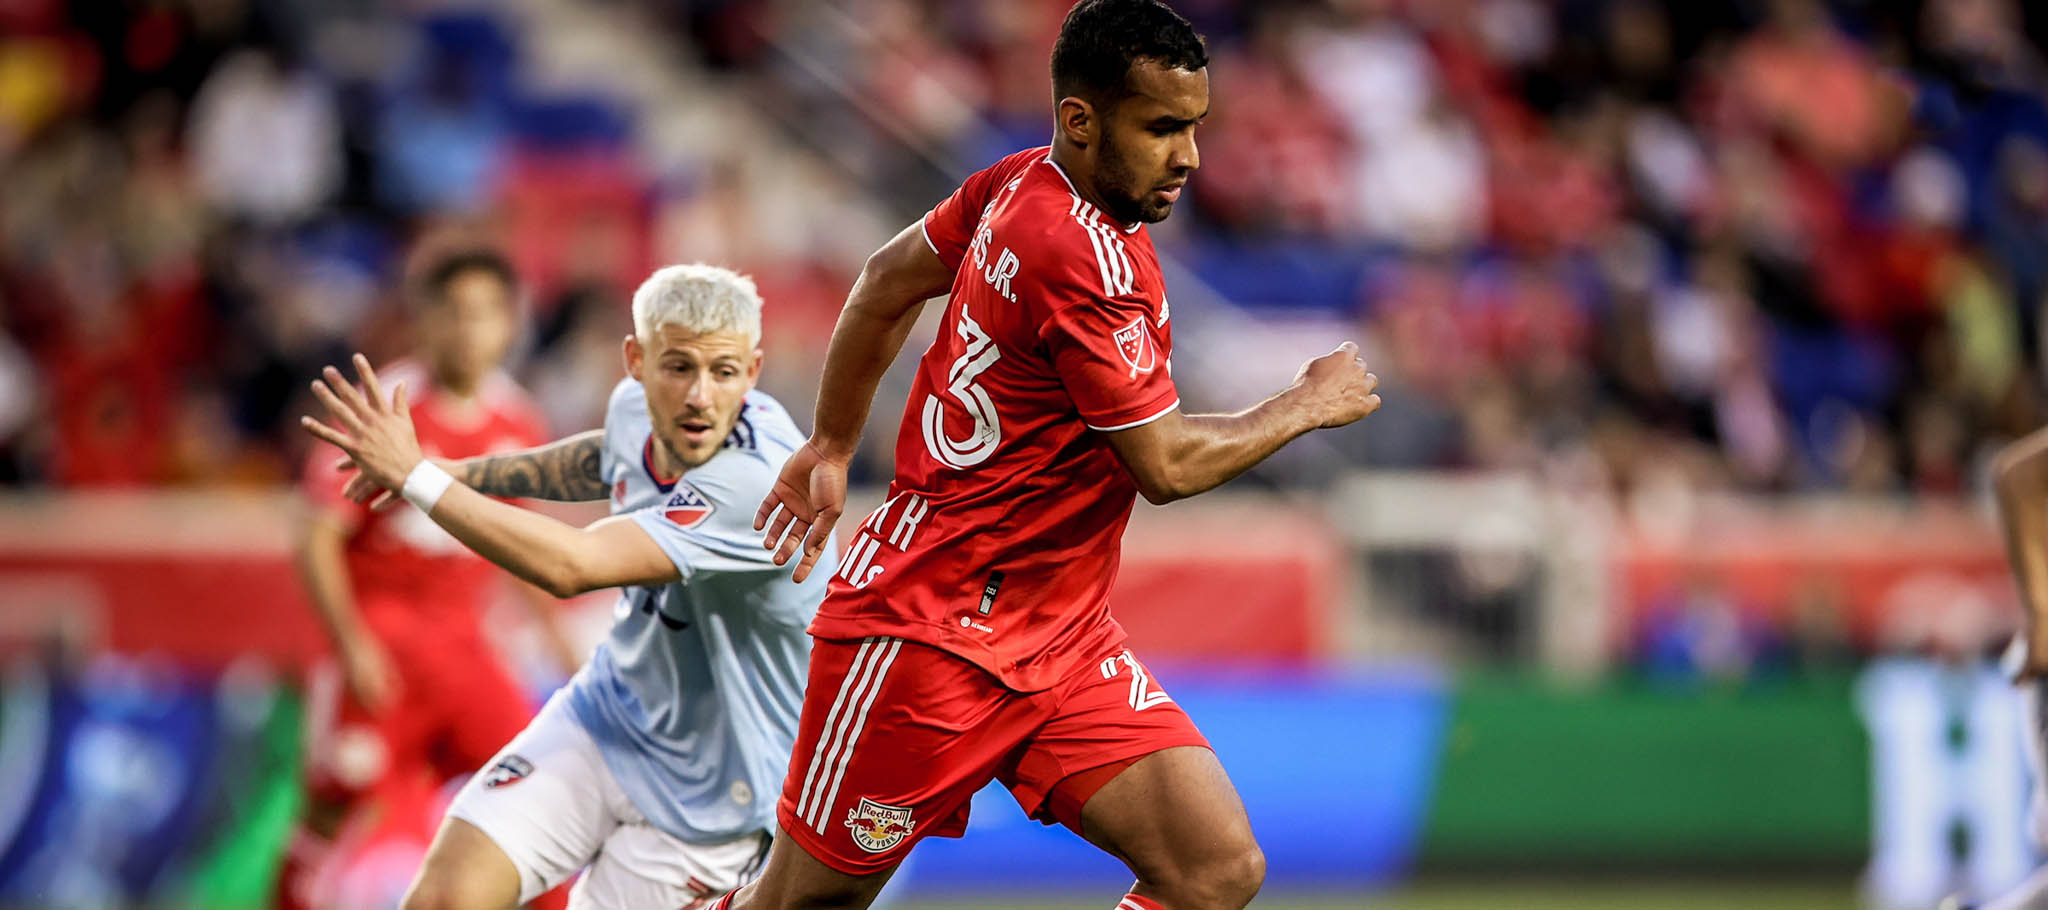 Top 2022 MLS Week 8 Matches to Bet On the Weekend